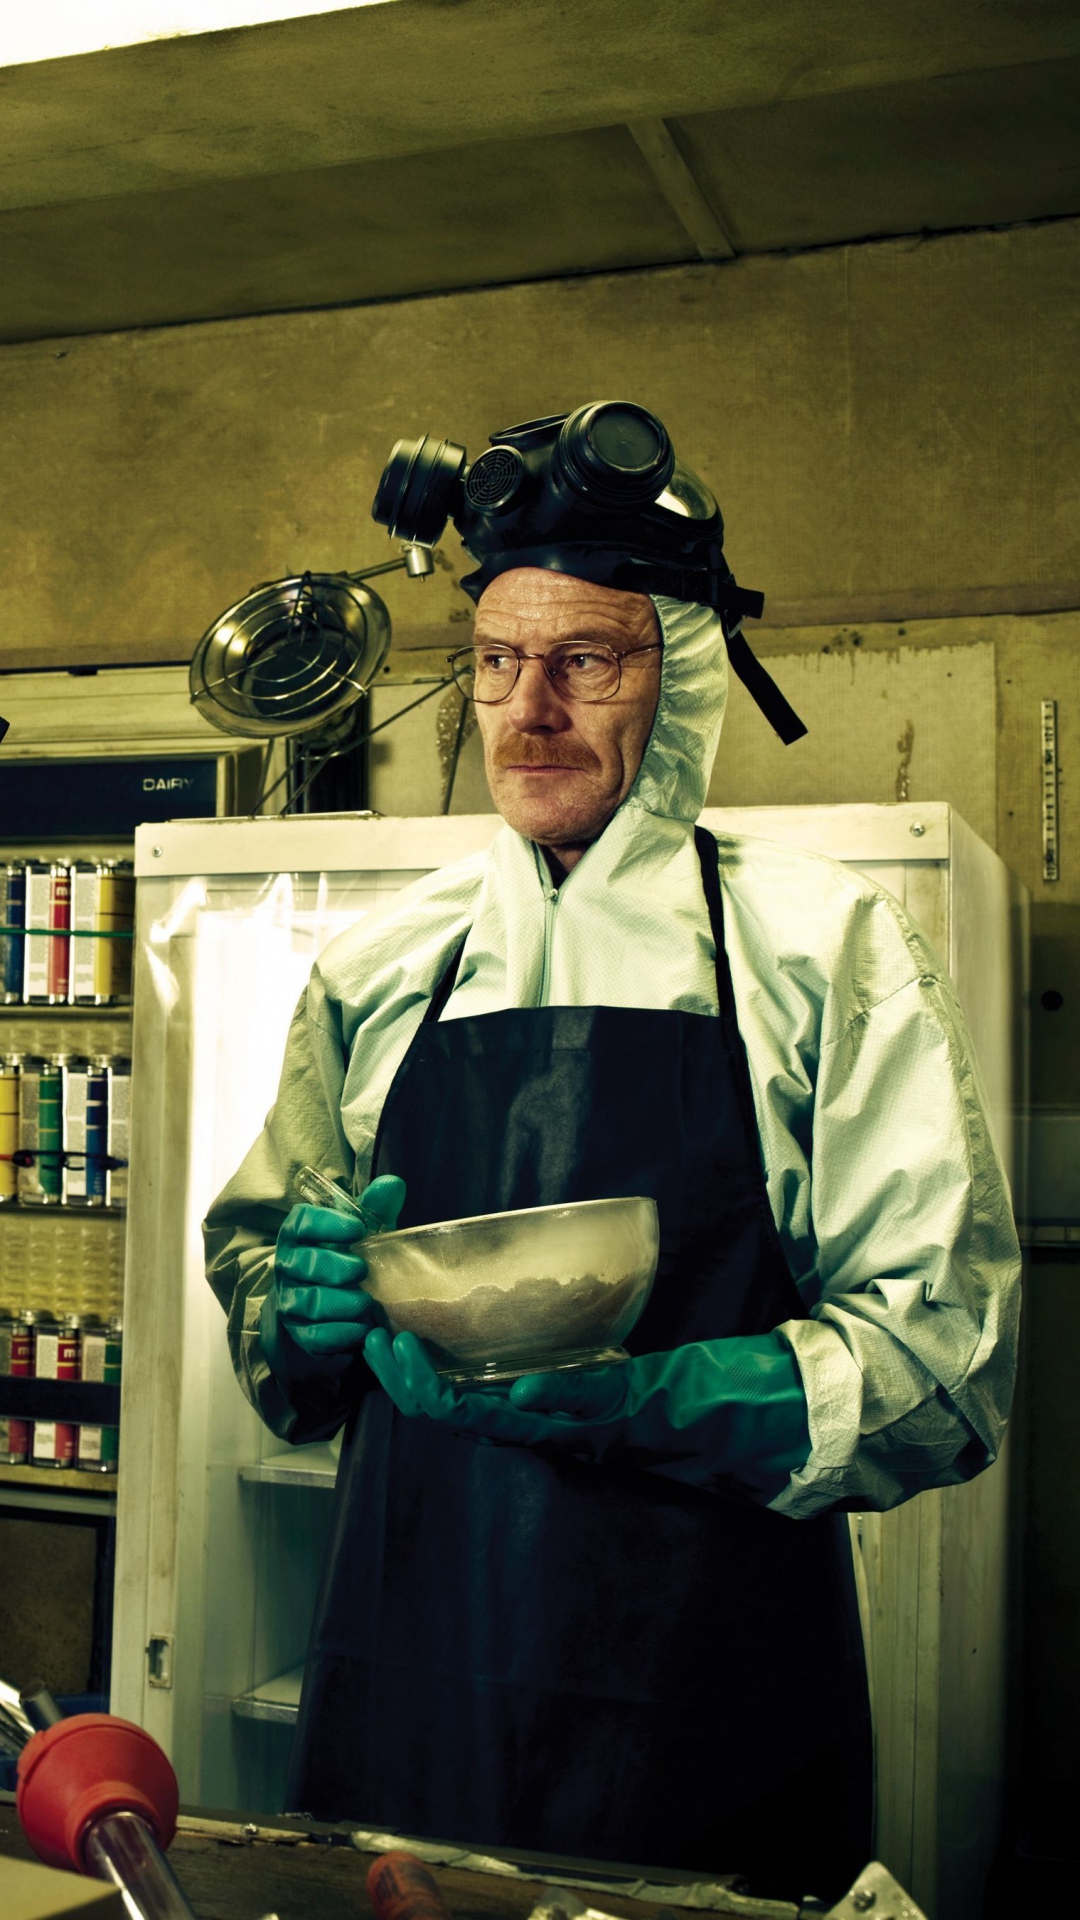 Breaking Bad wallpapers for iPhone and iPad